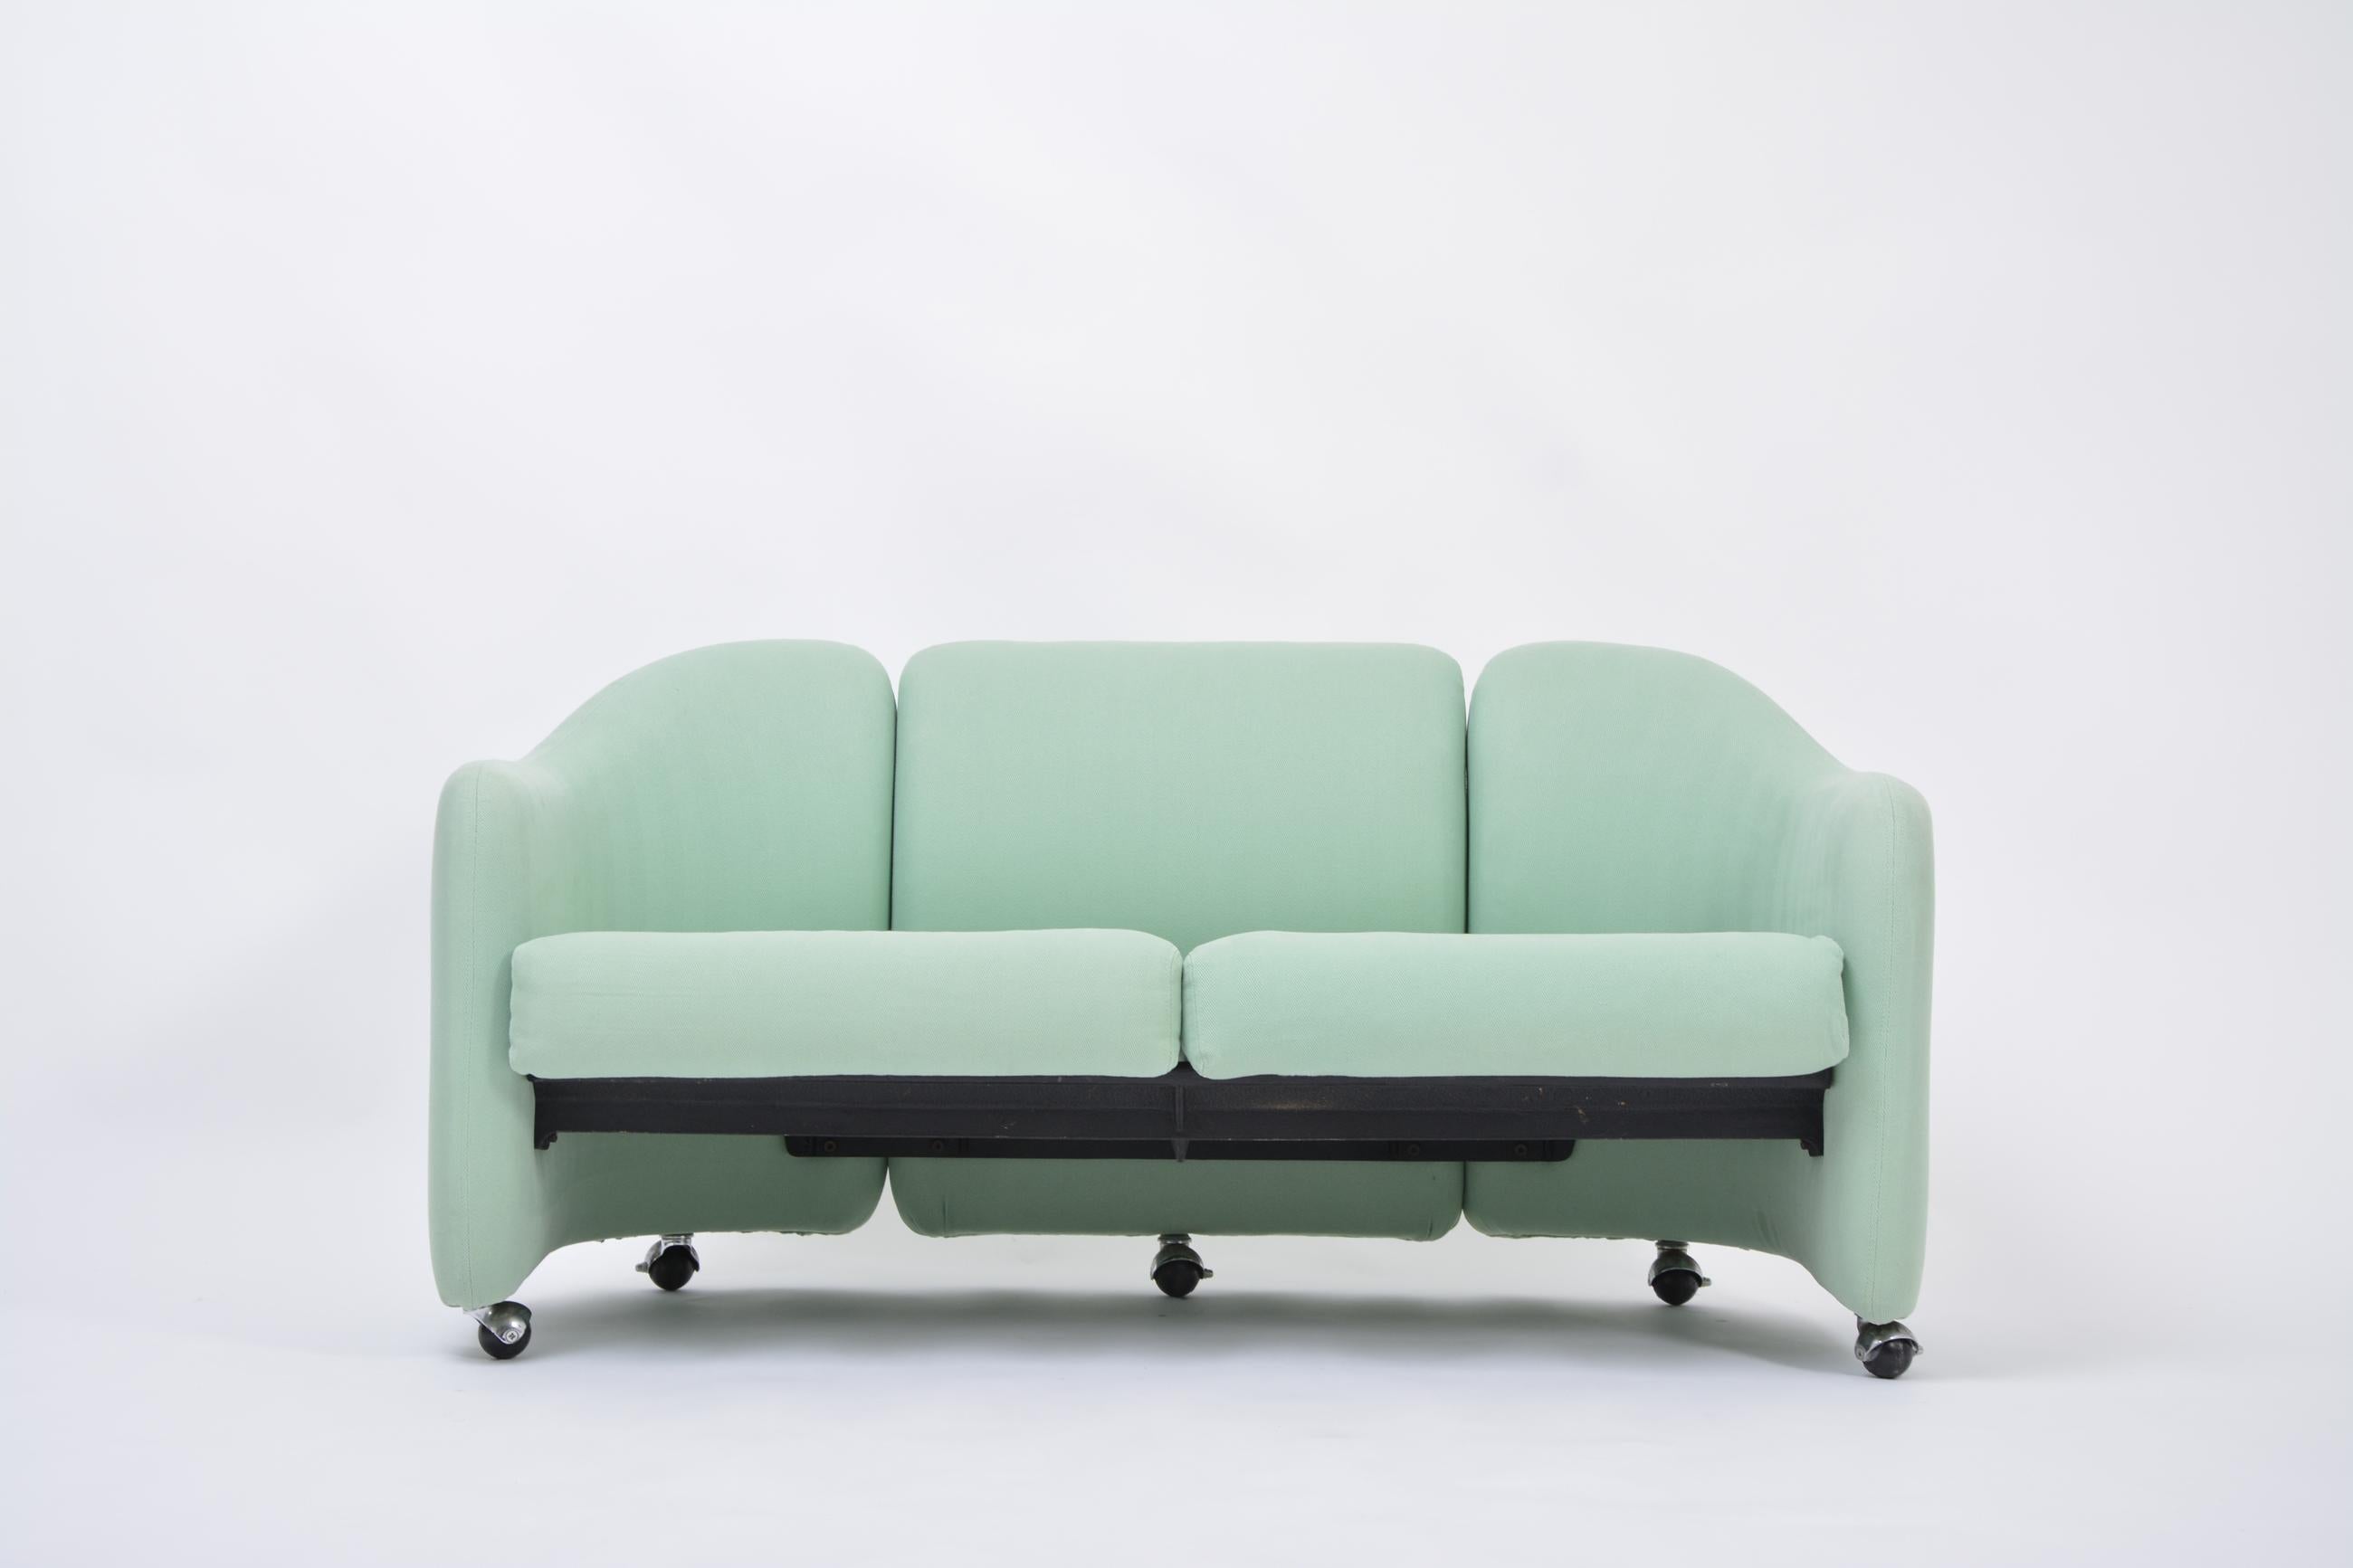 Italian Mid-Century Modern two-seater sofa by Eugenio Gerli for Tecno, 1966
Two-seat sofa on wheels, model D142, from the 142 series or the Clamis series, designed by Eugenio Gerli in 1966 and produced in Italy by Tecno.
The sofa has an internal